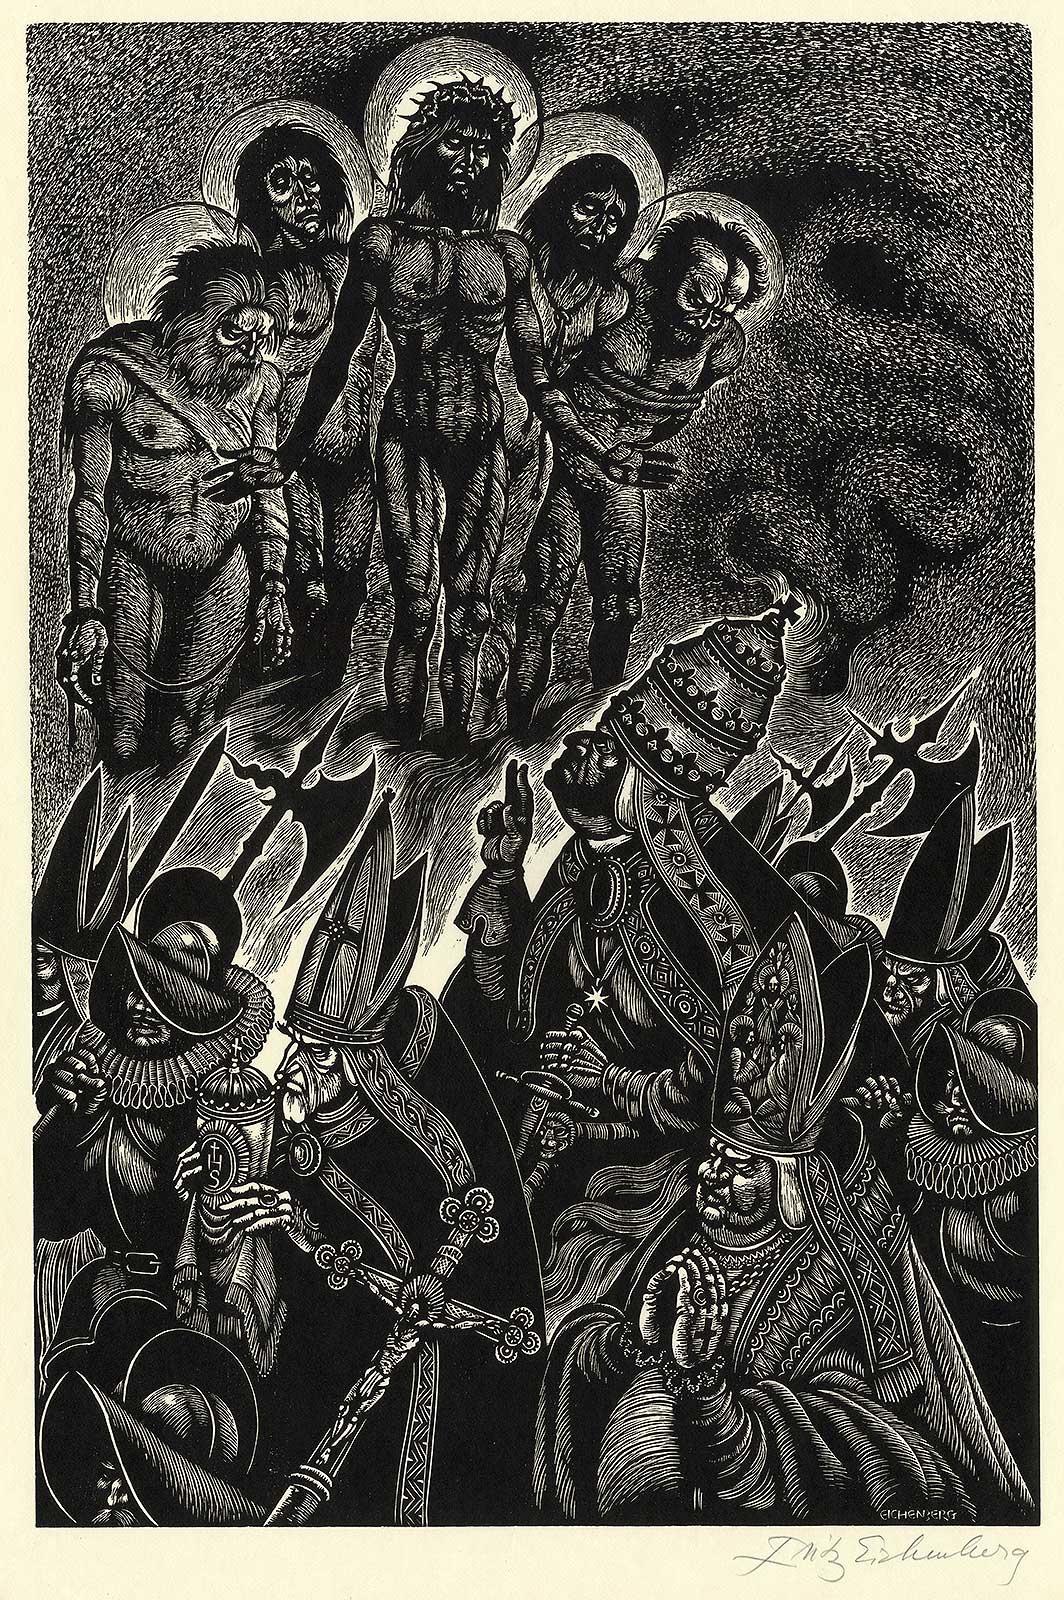 Follies of the Popes (1500 to 2019 - Whither progress? - American Modern Print by Fritz Eichenberg.